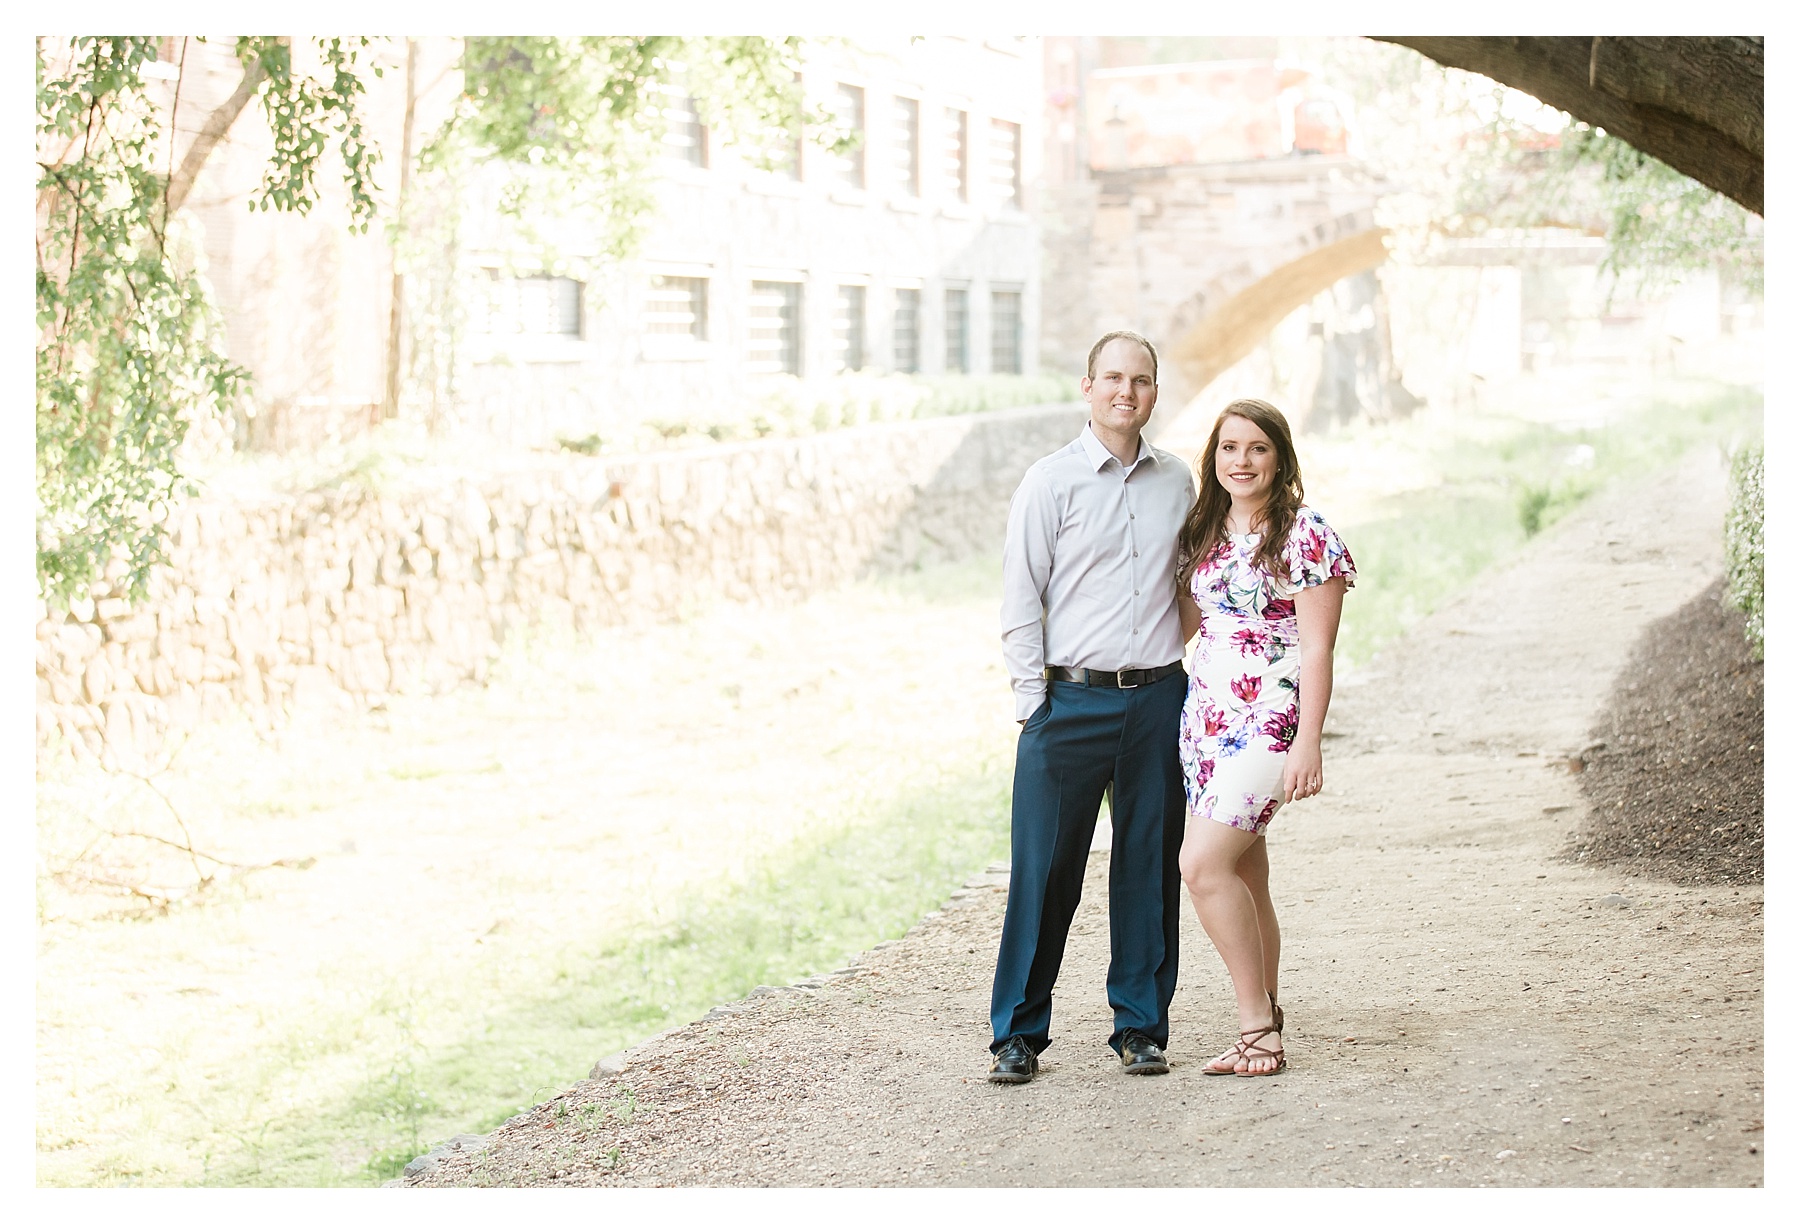 Candice Adelle Photography DC Wedding Photographer DC Georgetown Engagement_1550.jpg